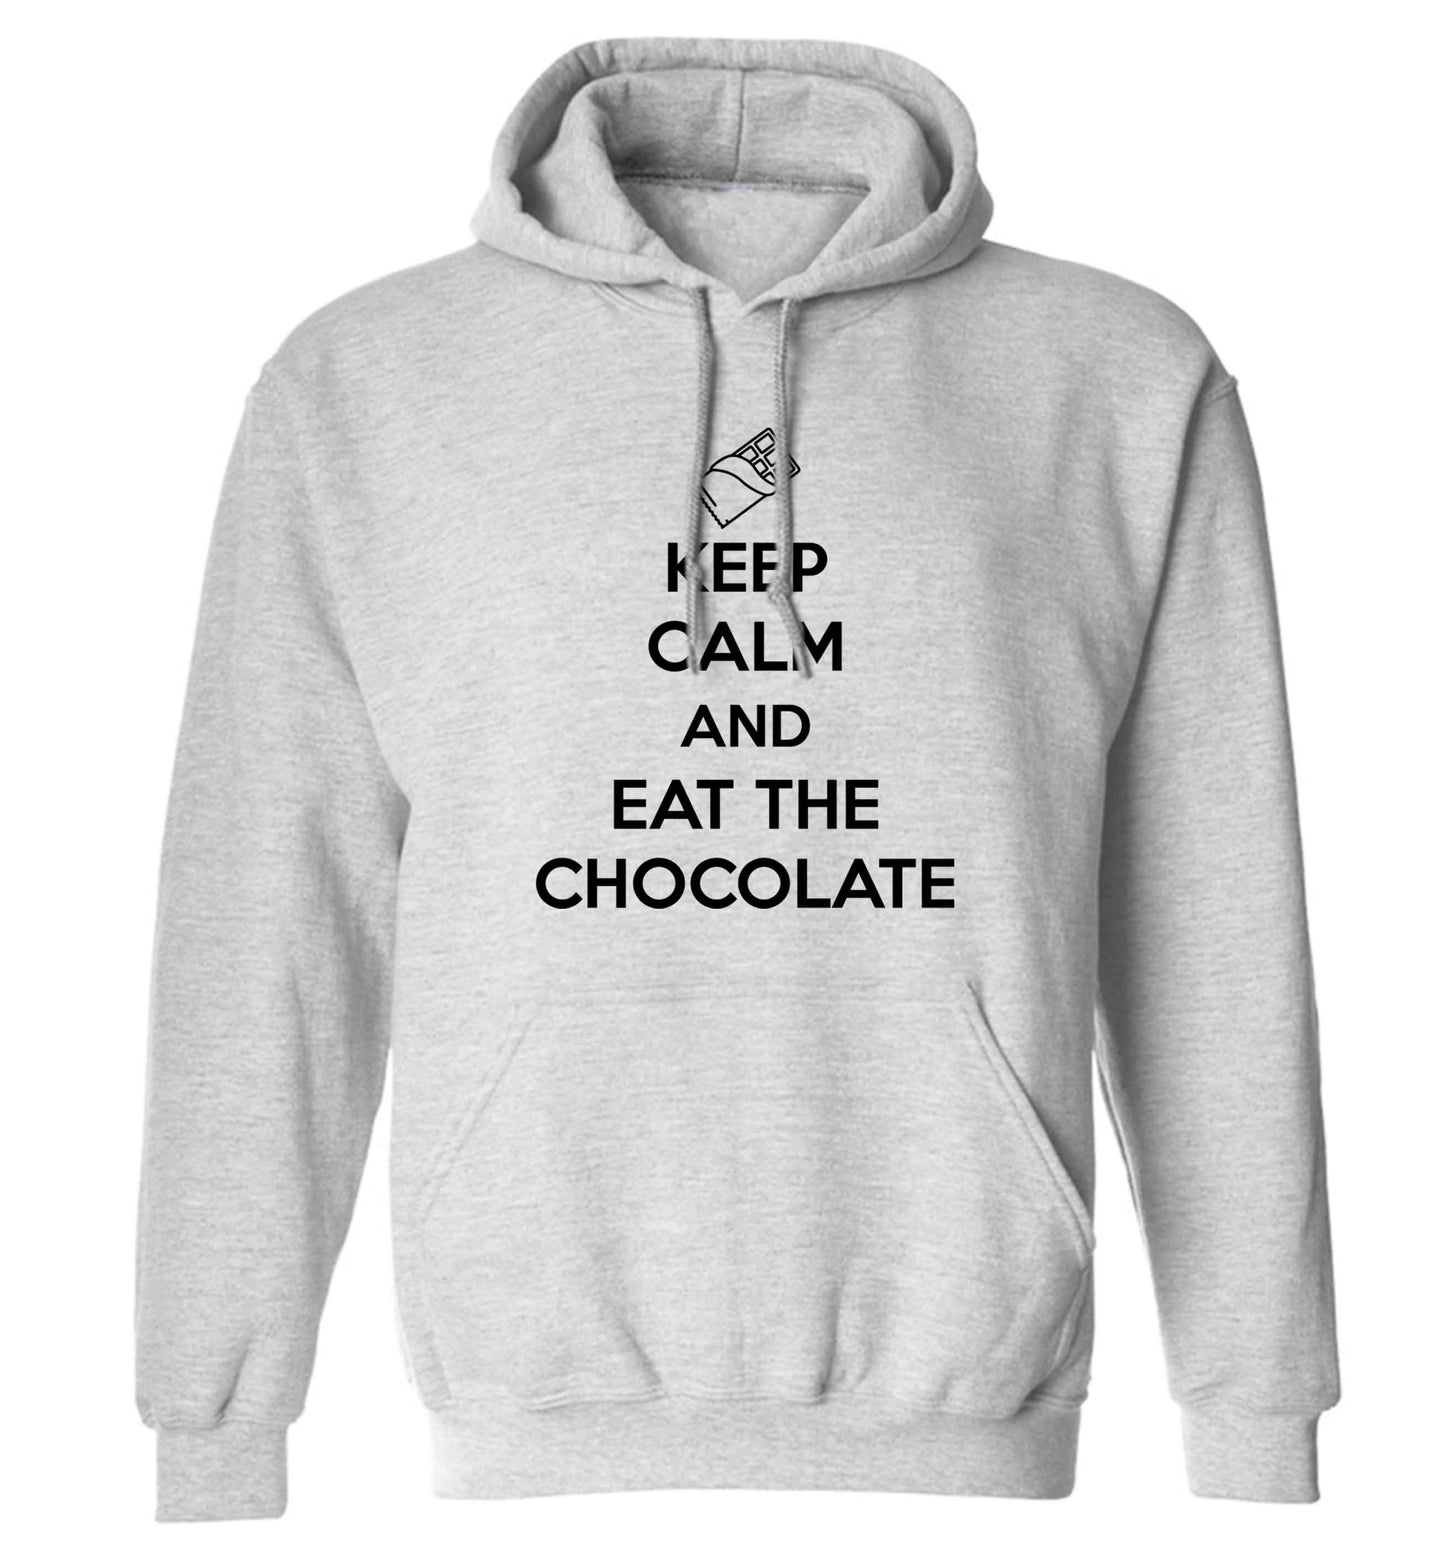 funny gift for a chocaholic! Keep calm and eat the chocolate adults unisex grey hoodie 2XL